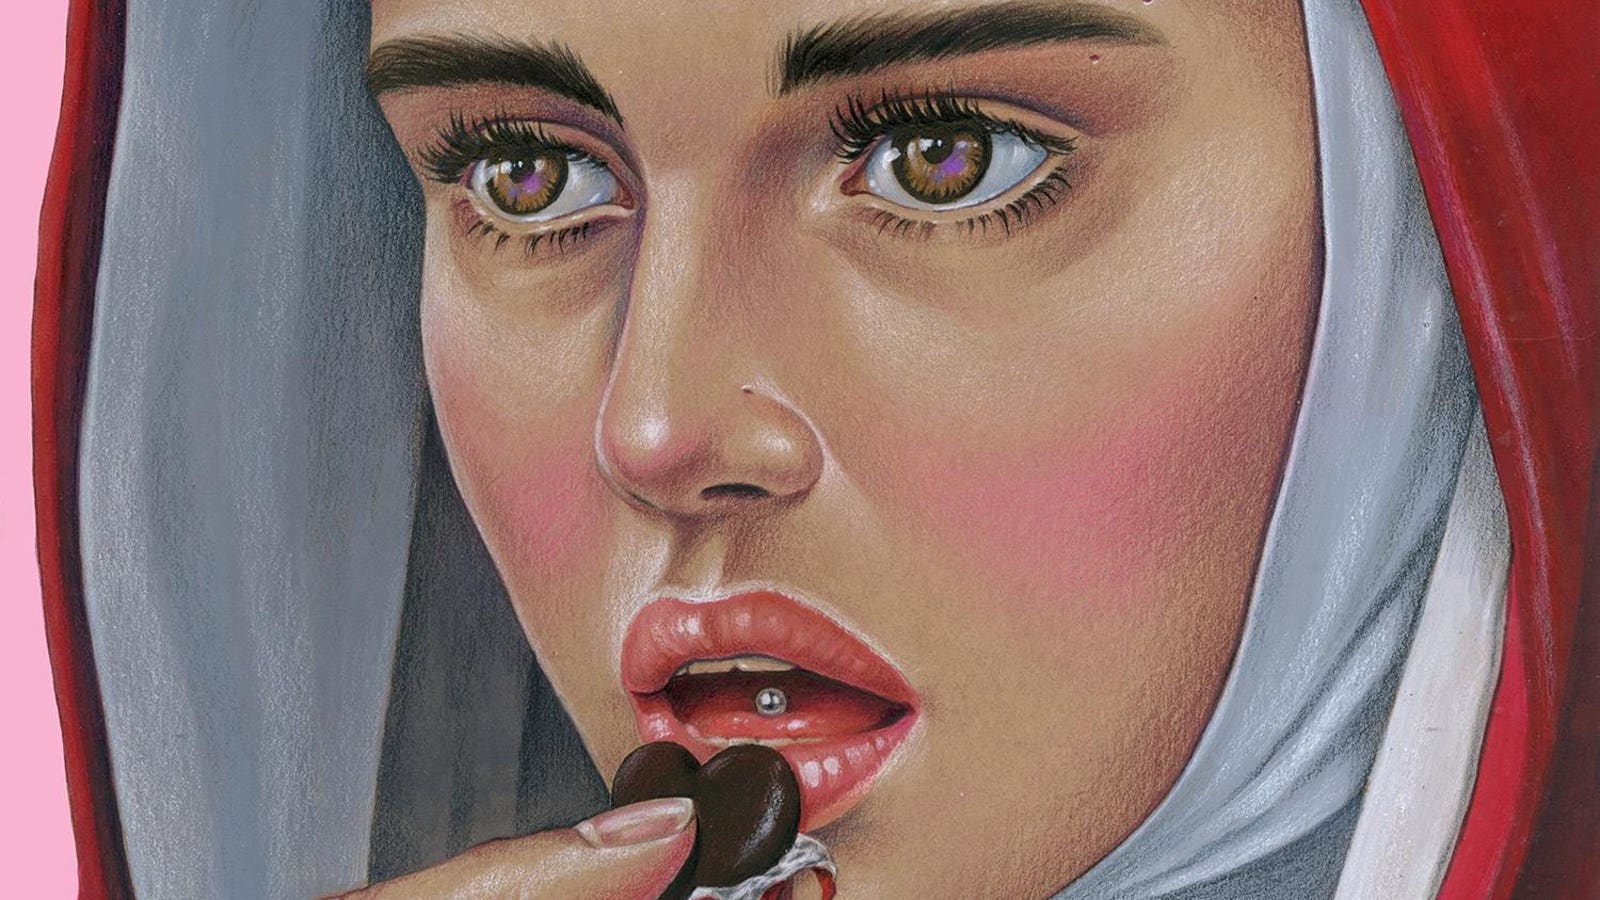 Artist Joyce Lee captures the sublime and the mundane of the female experience